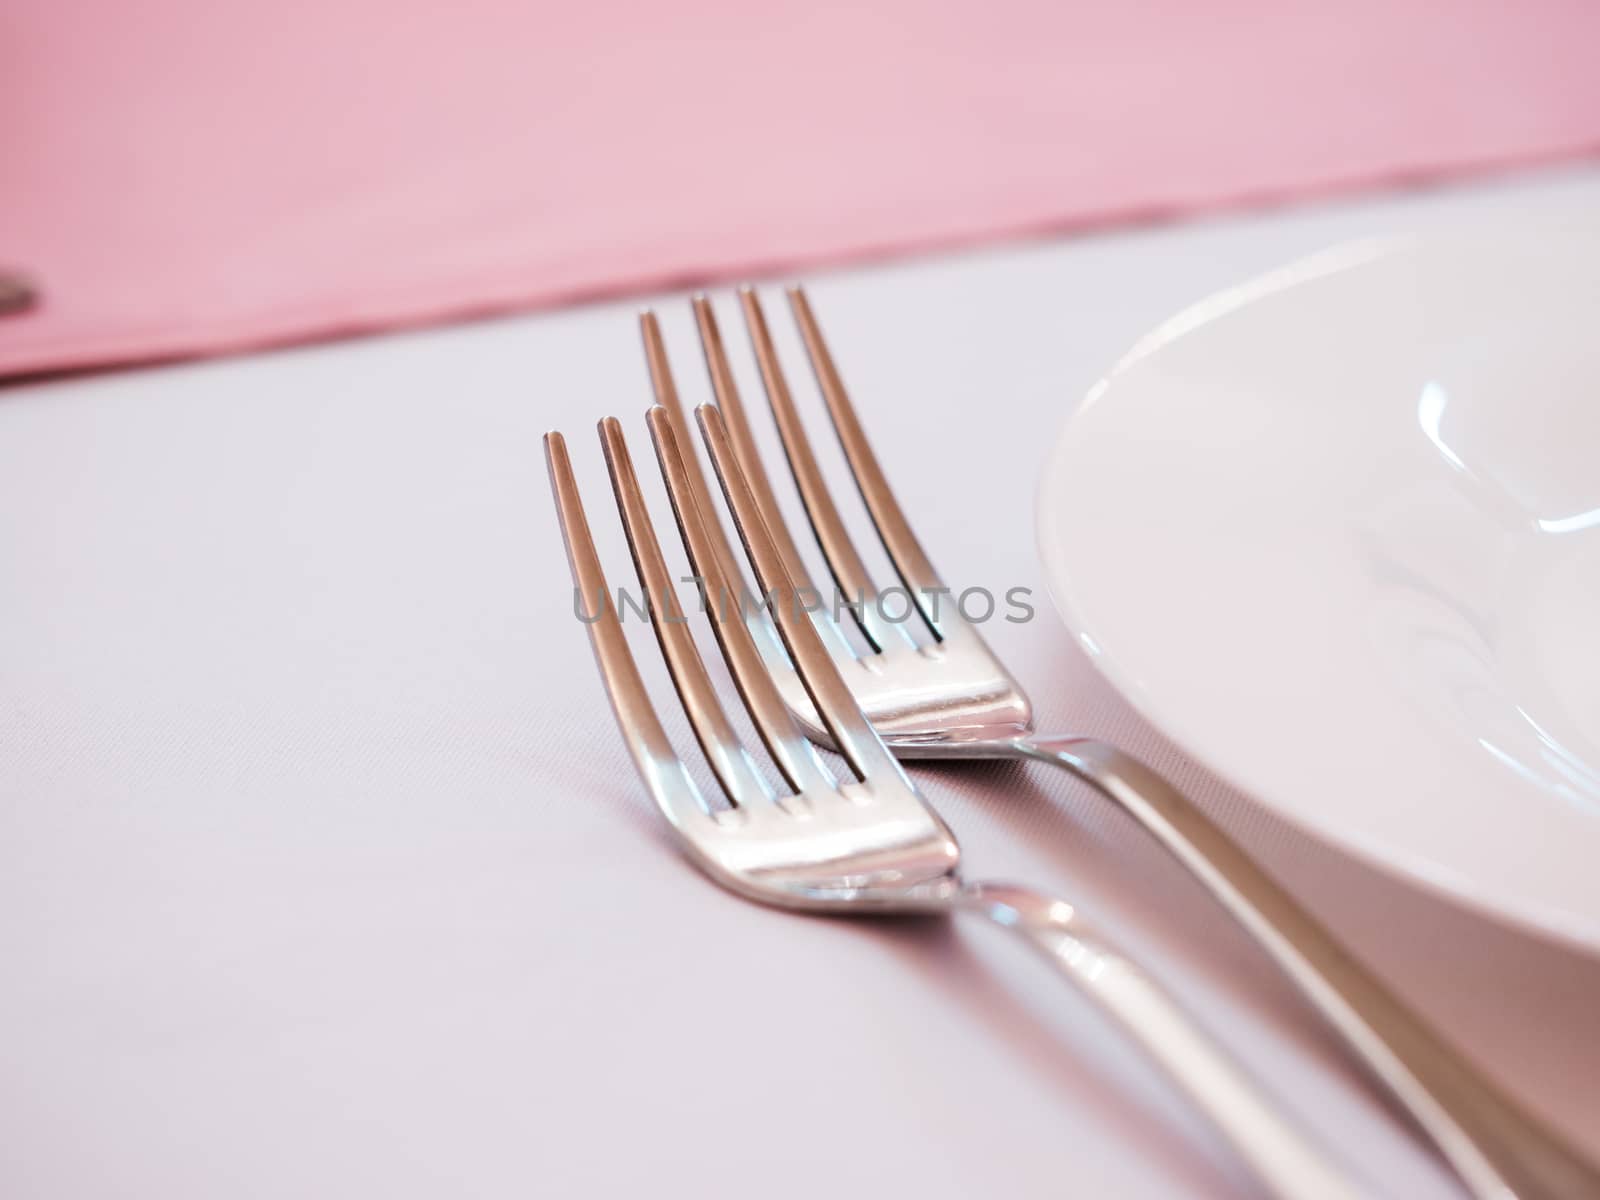 Two kitchen forks on dinner table with pink tablecloth